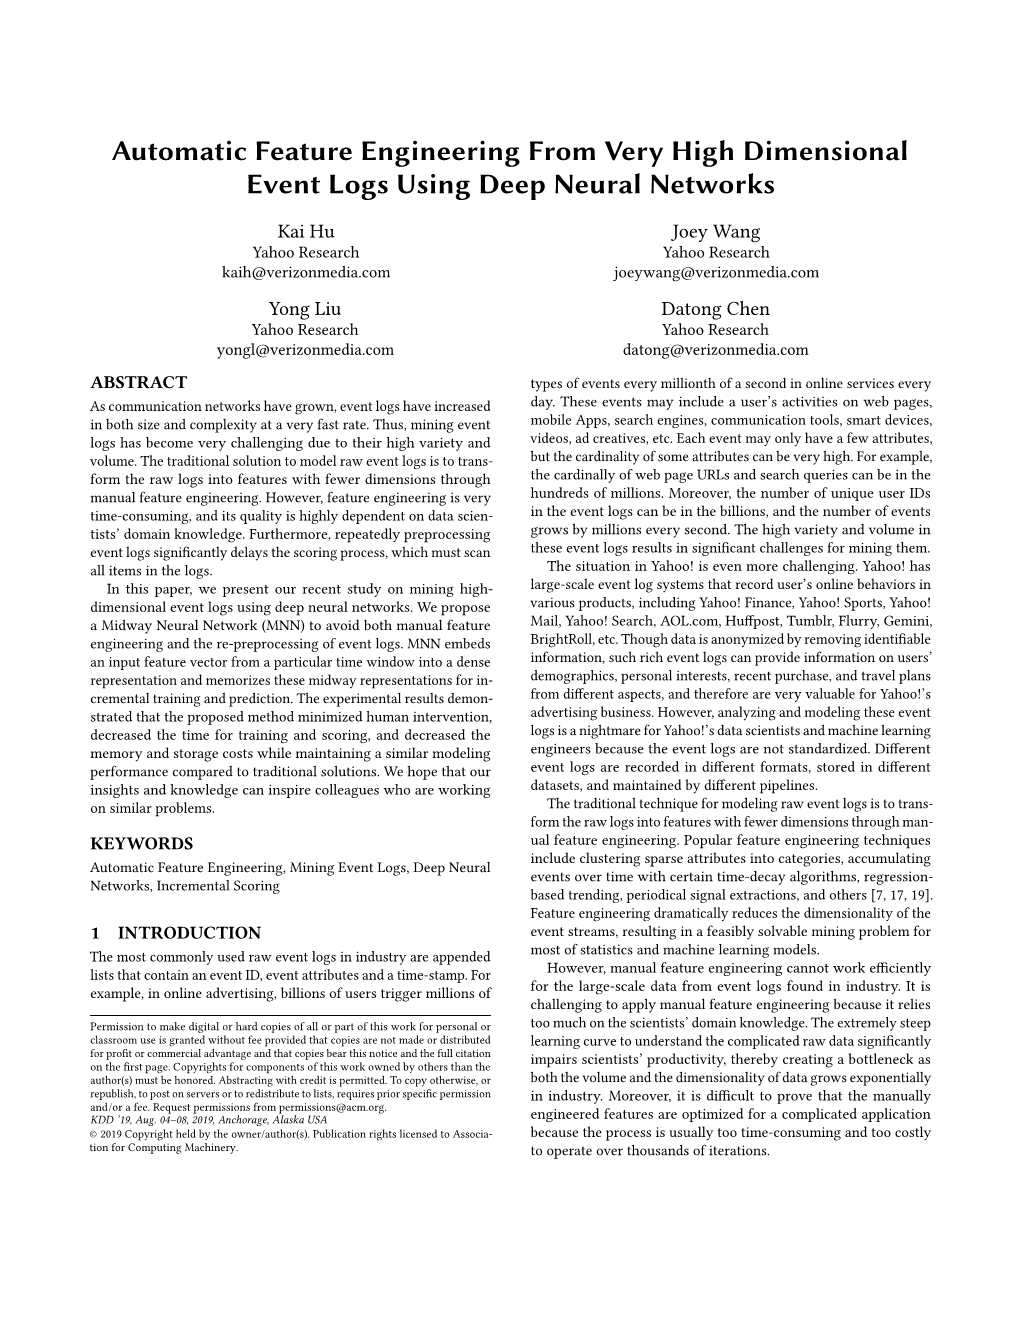 Automatic Feature Engineering from Very High Dimensional Event Logs Using Deep Neural Networks